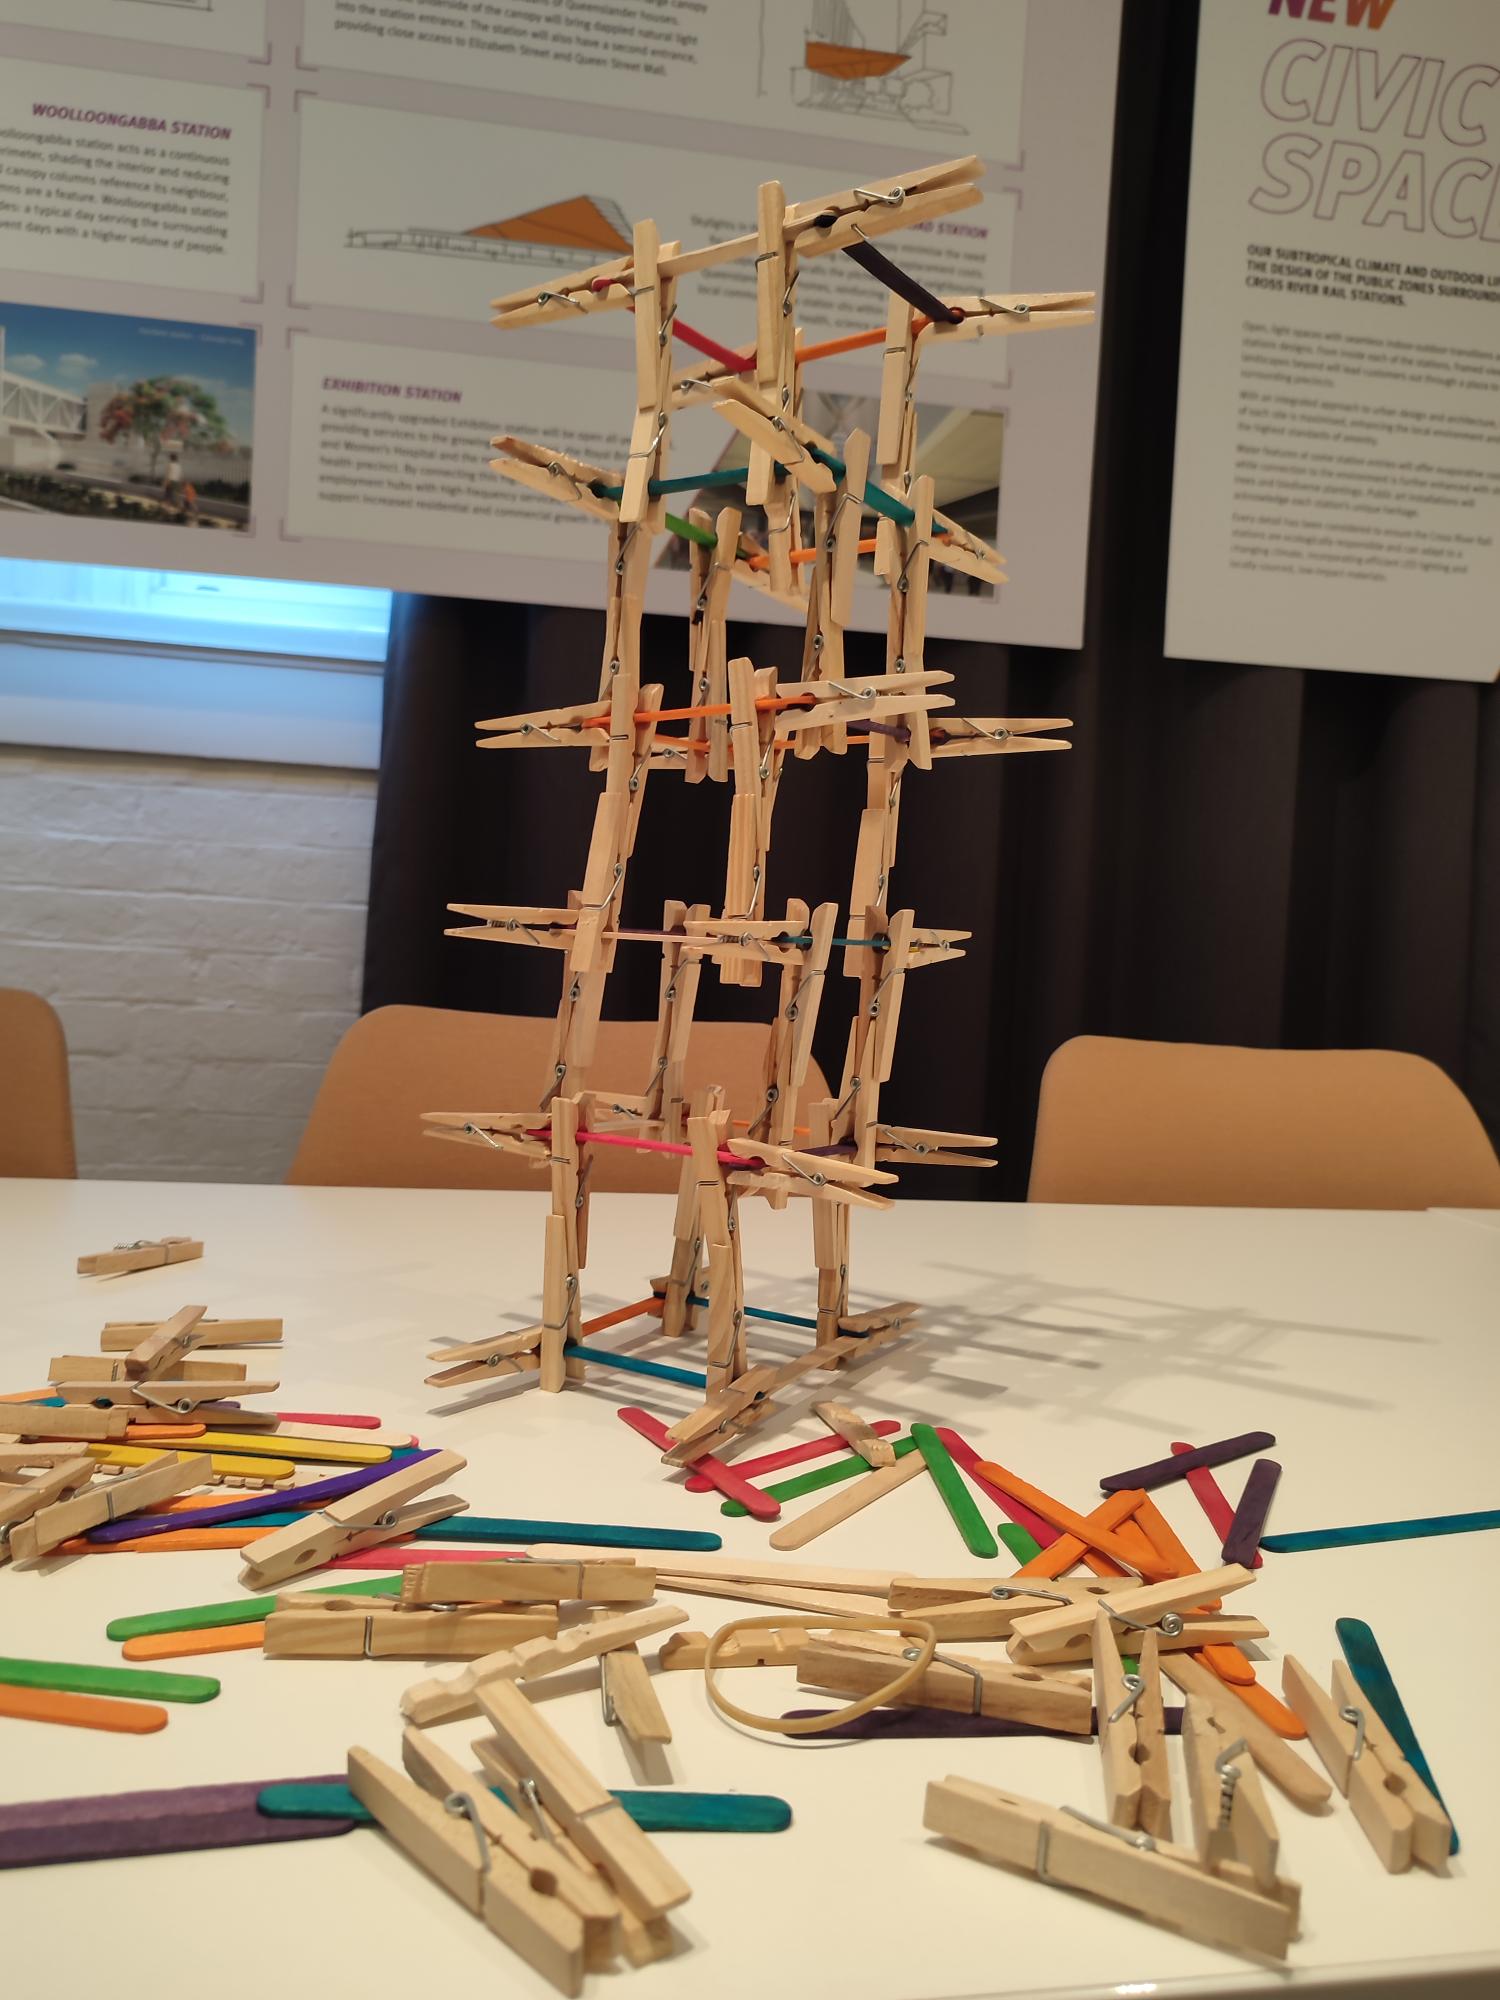 Building structure made oyr if wooden clothes pegs and coloured craft sticks.